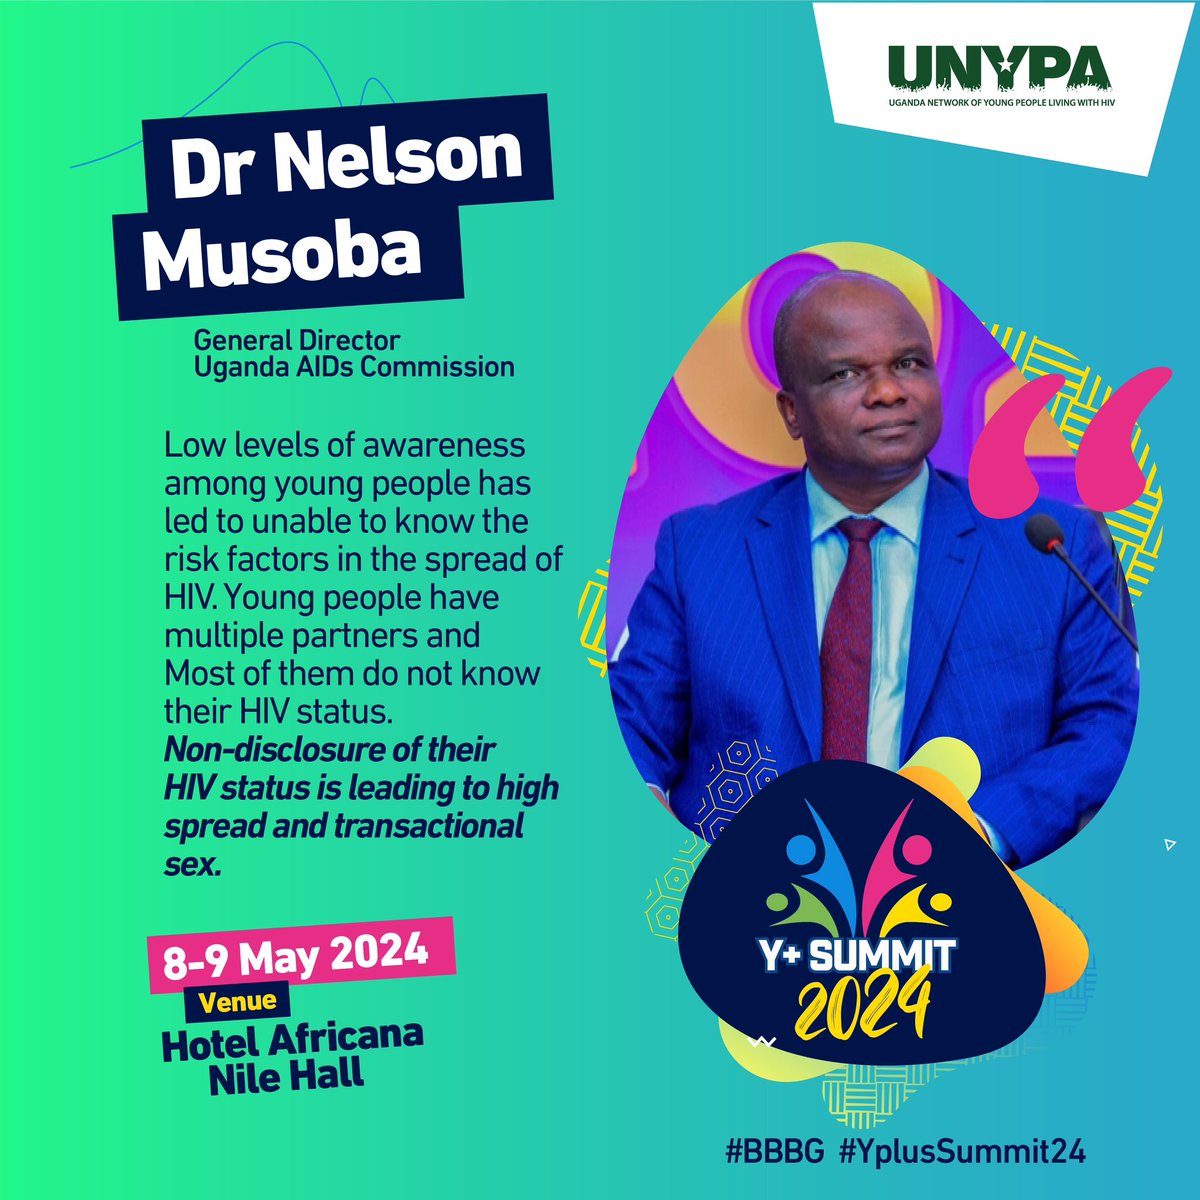 Education and access to HIV testing and resources are crucial in addressing these issues and promoting safer practices. Dr. @NelsonMusoba General Director @aidscommission #YPlusSummit24 #BBBG